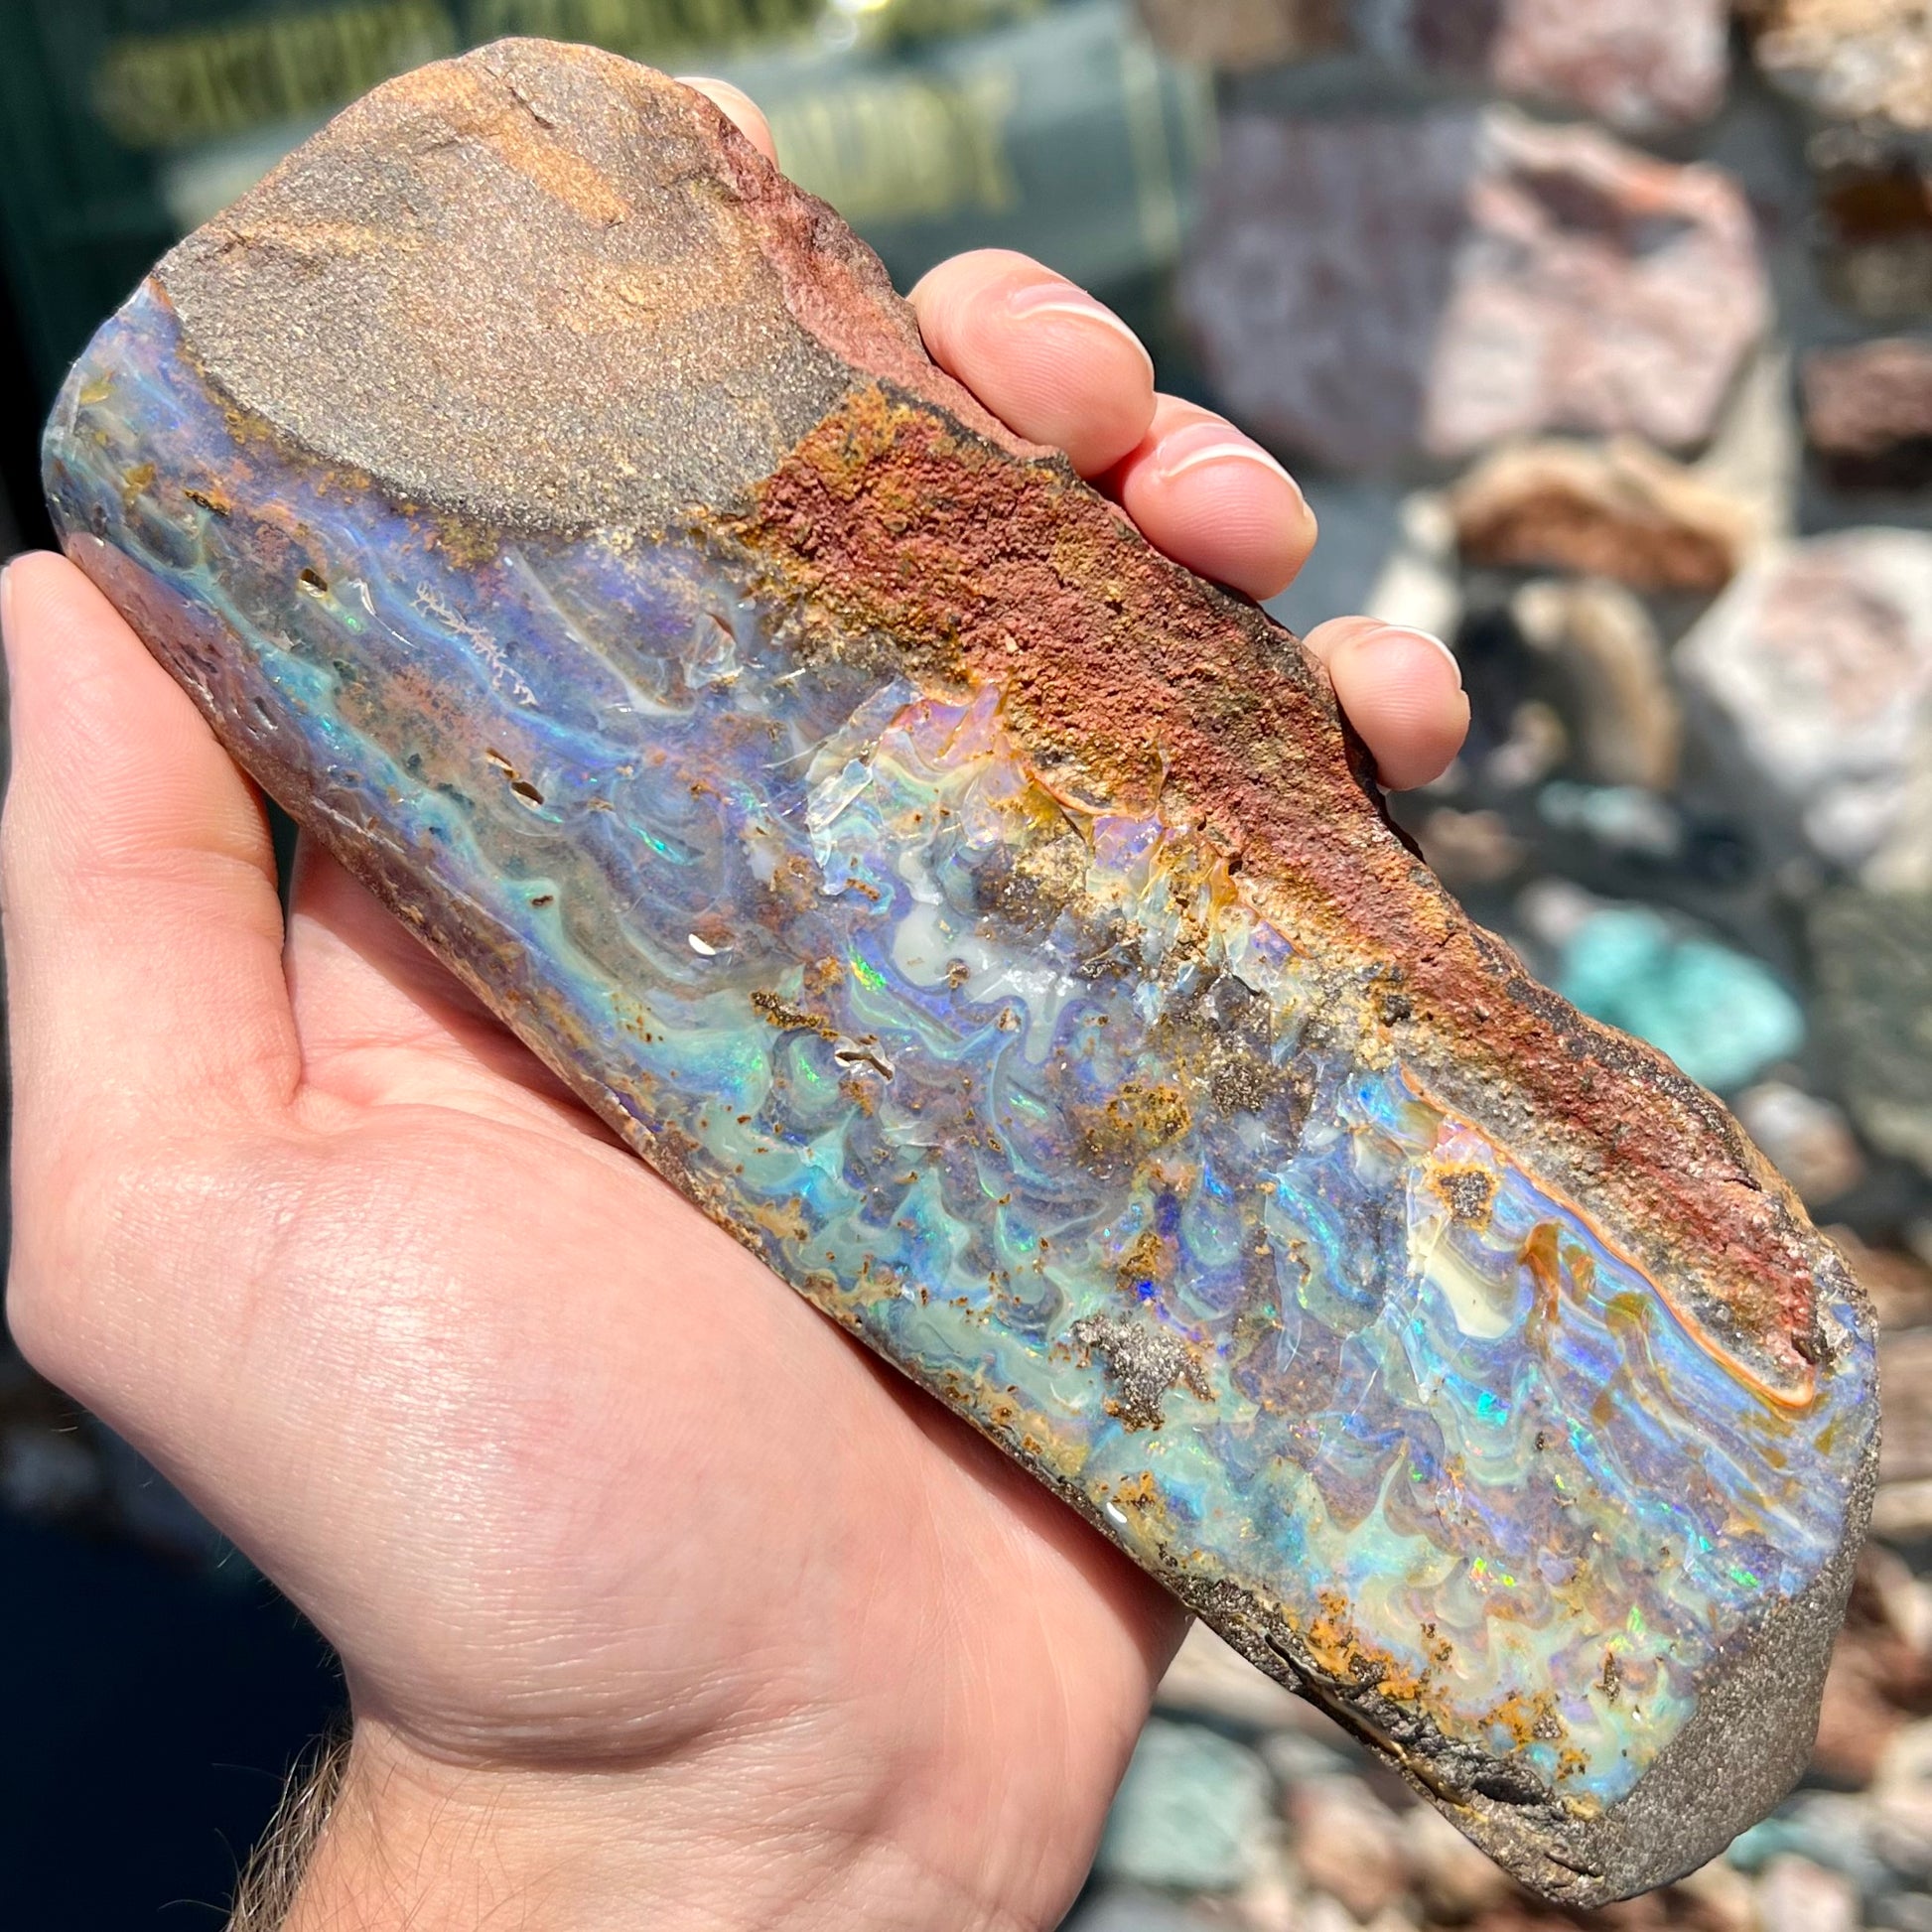 A 7 inch long, polished Quilpie boulder opal specimen.  The stone shows colors of blue, green, and orange.